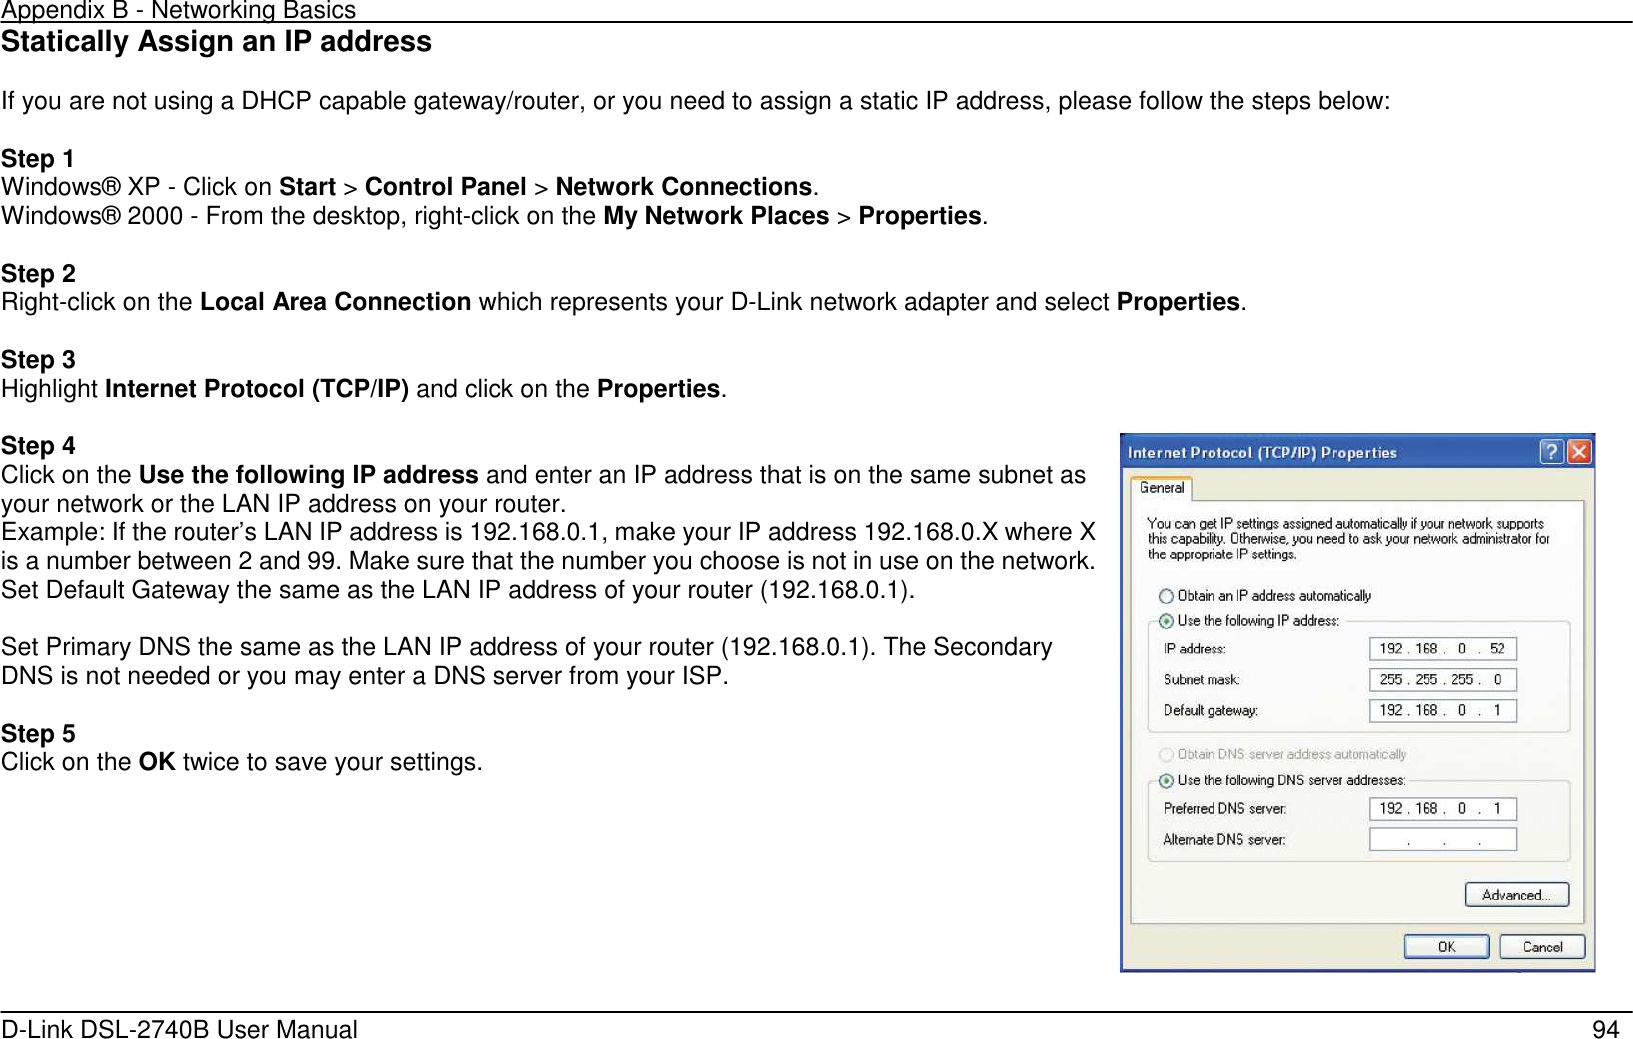 Appendix B - Networking Basics   D-Link DSL-2740B User Manual                                                  94 Statically Assign an IP address  If you are not using a DHCP capable gateway/router, or you need to assign a static IP address, please follow the steps below:  Step 1 Windows® XP - Click on Start &gt; Control Panel &gt; Network Connections. Windows® 2000 - From the desktop, right-click on the My Network Places &gt; Properties.  Step 2 Right-click on the Local Area Connection which represents your D-Link network adapter and select Properties.  Step 3 Highlight Internet Protocol (TCP/IP) and click on the Properties.  Step 4 Click on the Use the following IP address and enter an IP address that is on the same subnet as your network or the LAN IP address on your router. Example: If the router’s LAN IP address is 192.168.0.1, make your IP address 192.168.0.X where X is a number between 2 and 99. Make sure that the number you choose is not in use on the network. Set Default Gateway the same as the LAN IP address of your router (192.168.0.1).  Set Primary DNS the same as the LAN IP address of your router (192.168.0.1). The Secondary DNS is not needed or you may enter a DNS server from your ISP.  Step 5 Click on the OK twice to save your settings.   